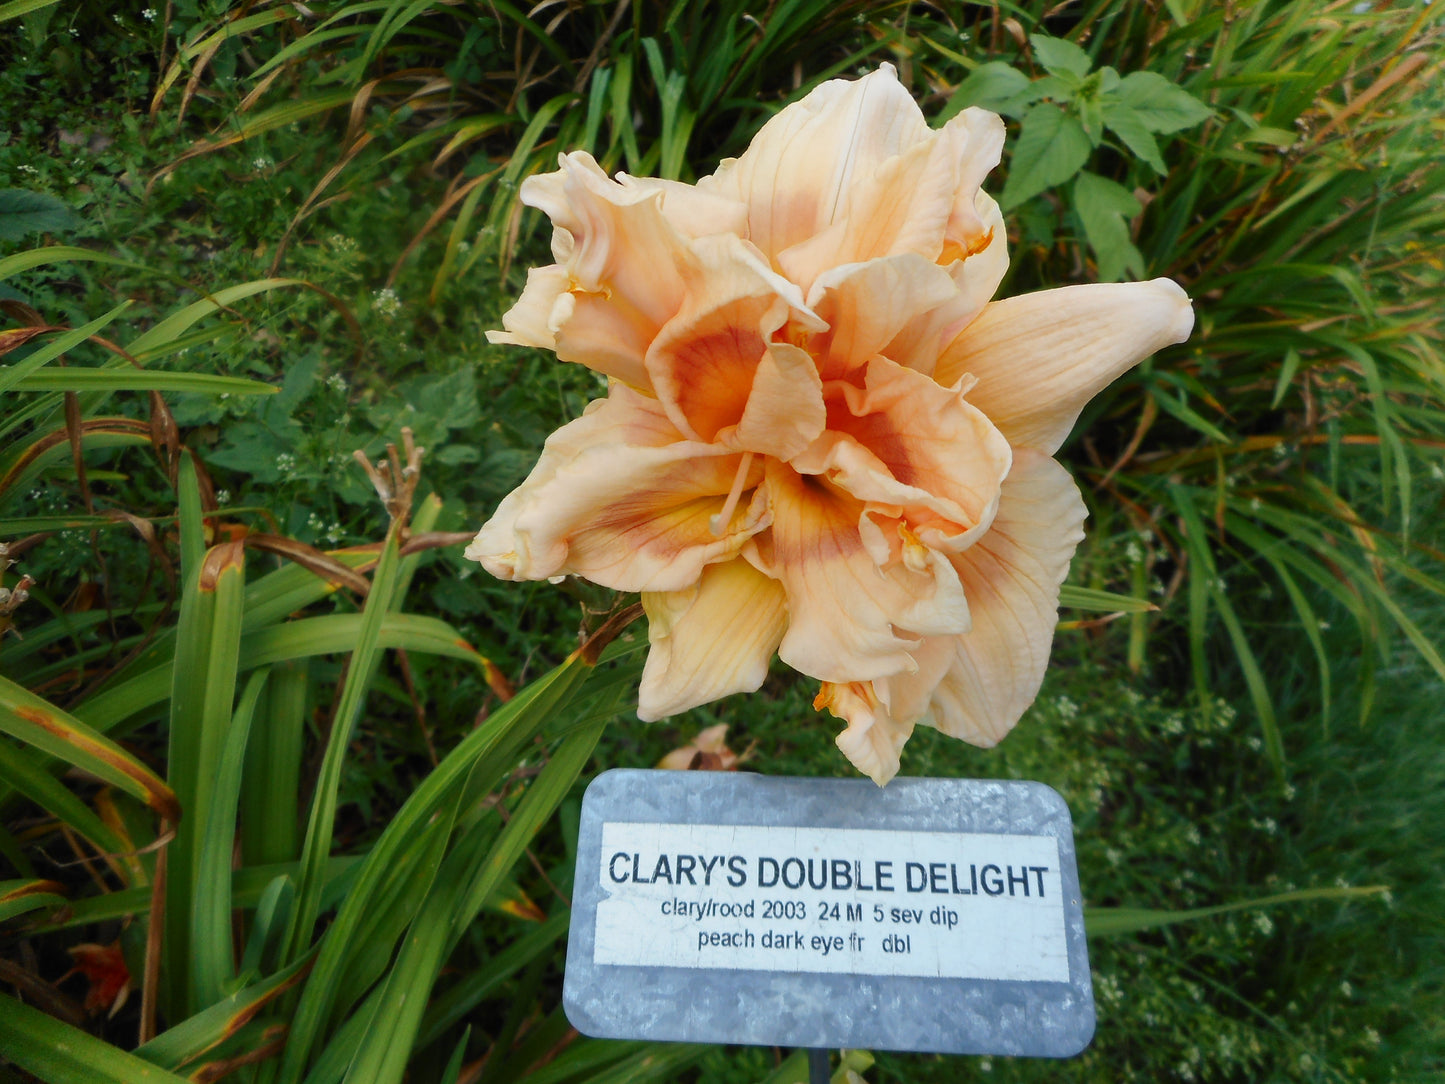 CLARY'S DOUBLE DELIGHT